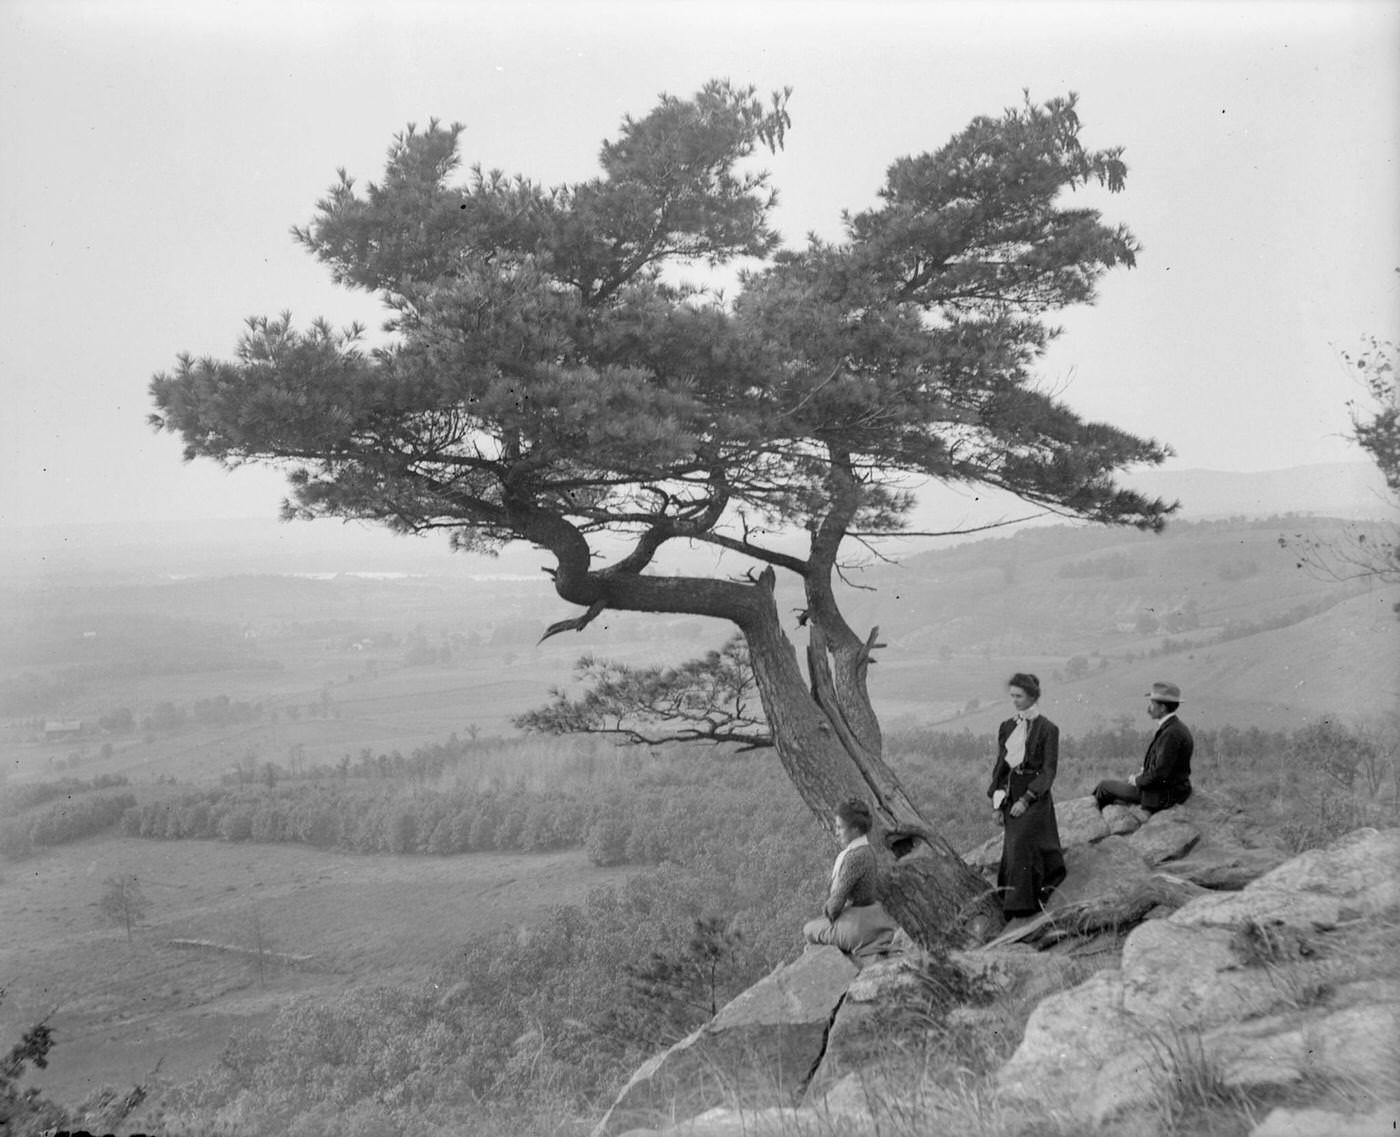 Two women and a man pose atop Gibraltar Rock in Richmond Memorial Park, which was dedicated by Jens Jensen and the Wisconsin Friends in 1927 in order to conserve the native landscape, West Point, Wisconsin, 1902.